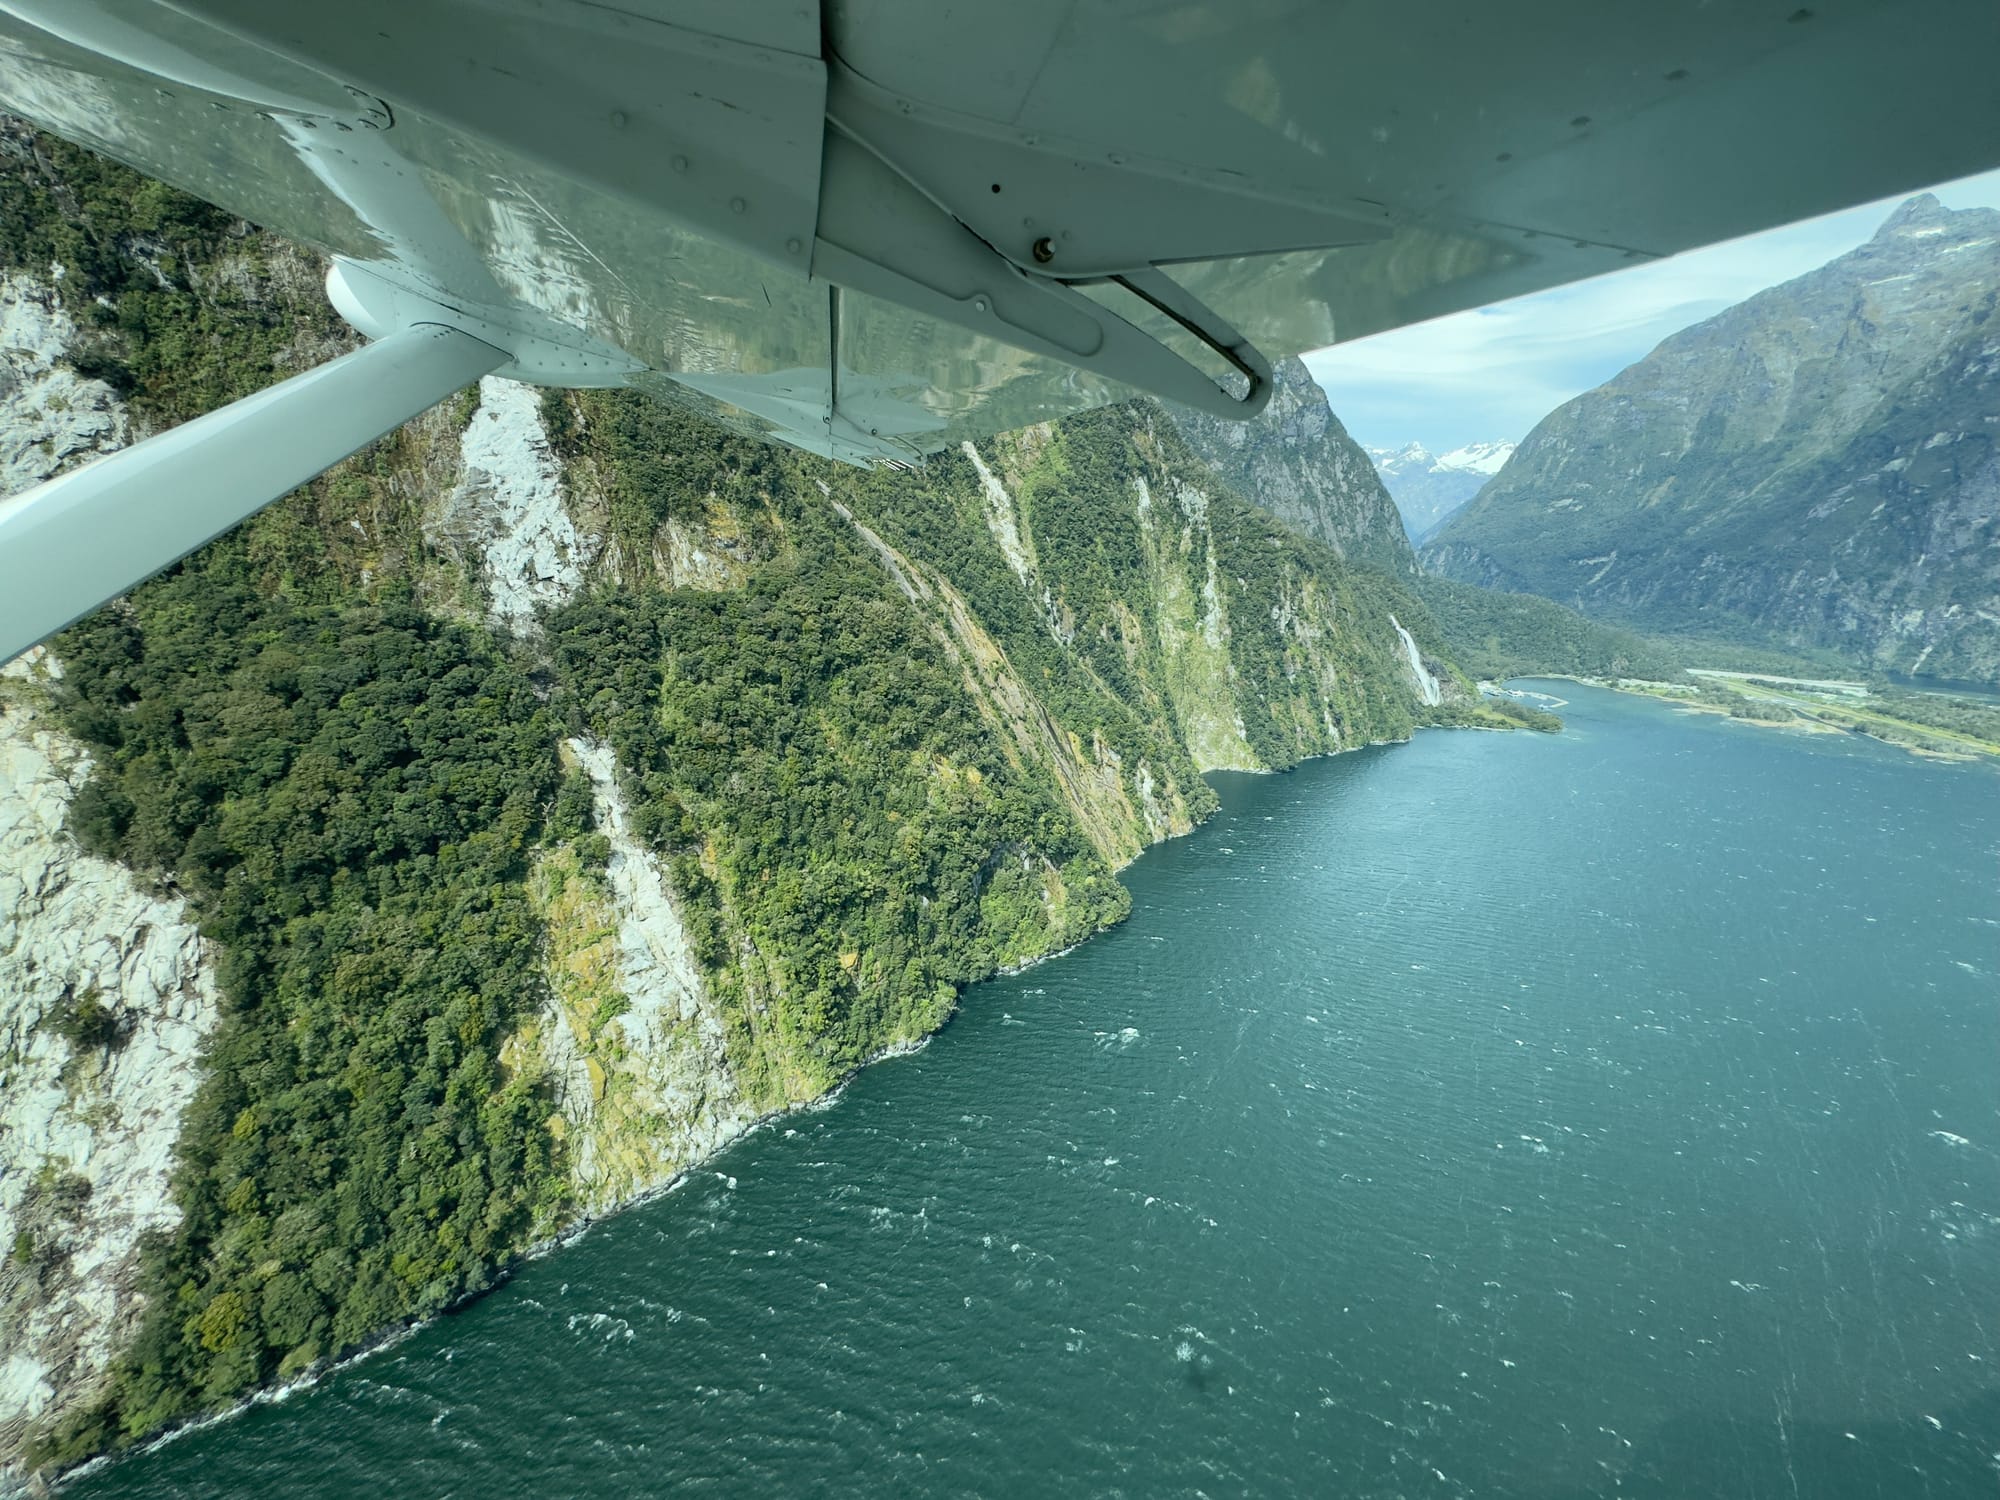 Flight Review: Glenorchy Air Cessna 208B from Milford Sound